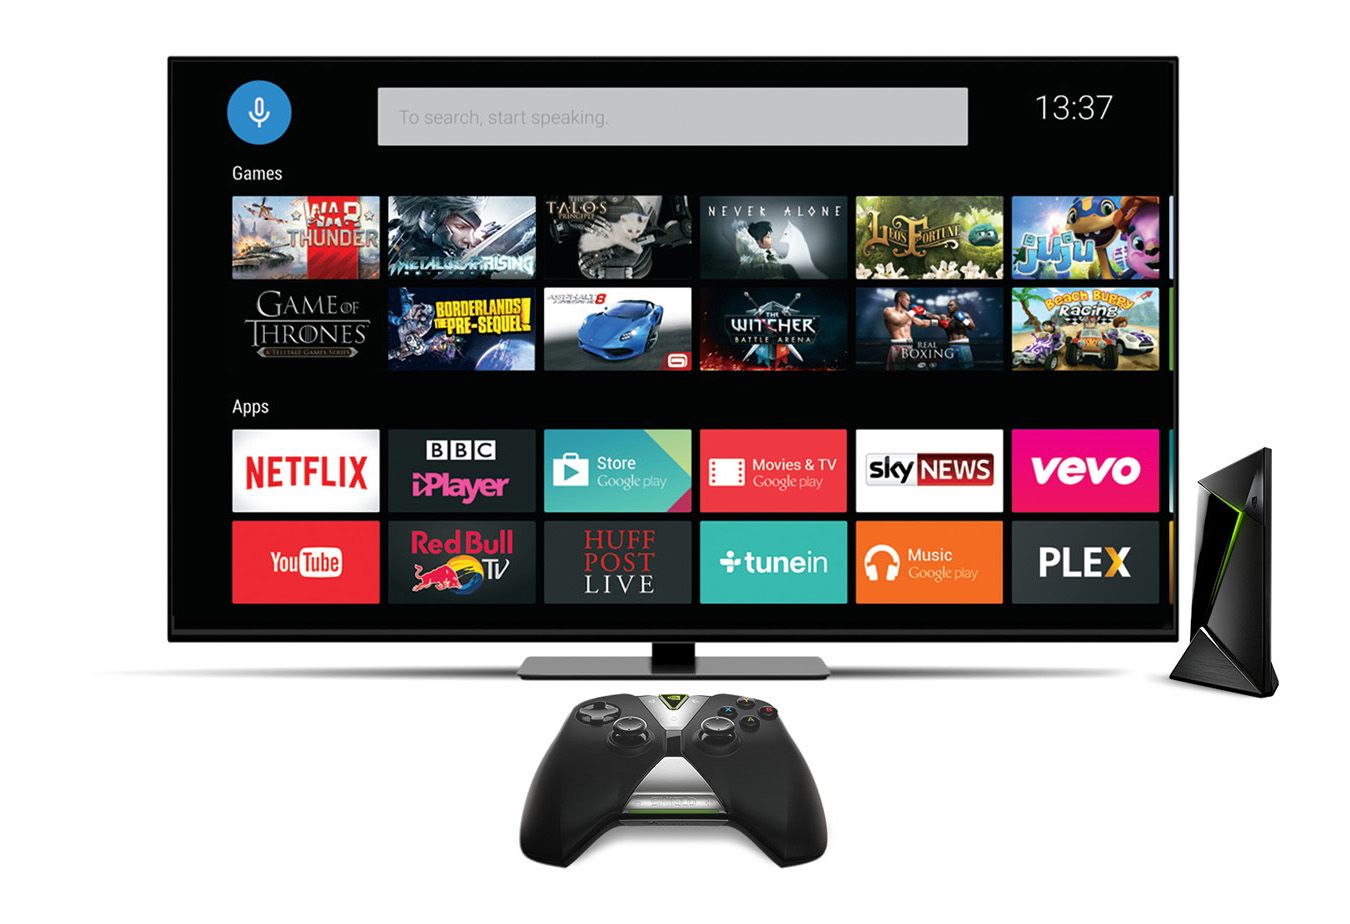 nvidia shield android tv uk release date revealed 4k60 streaming geforce now gaming image 1